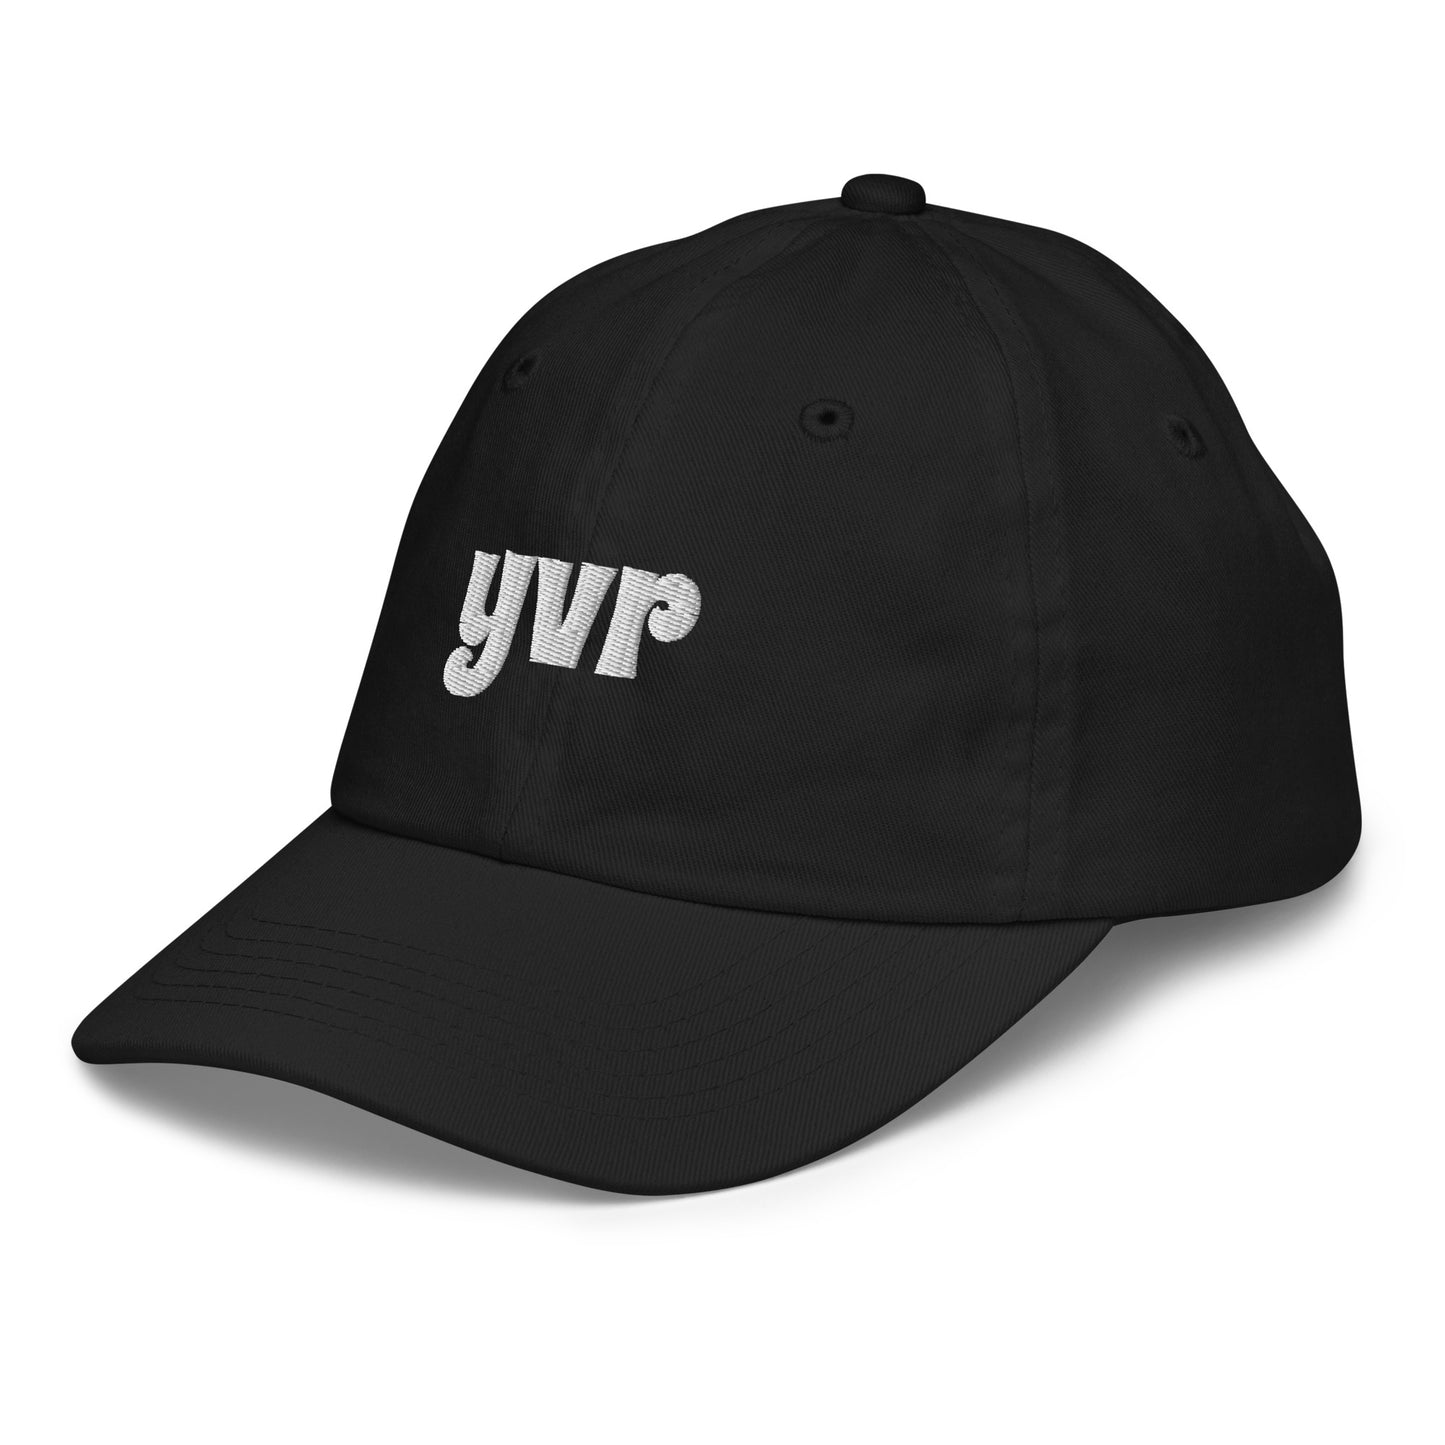 Groovy Kid's Baseball Cap - White • YVR Vancouver • YHM Designs - Image 11